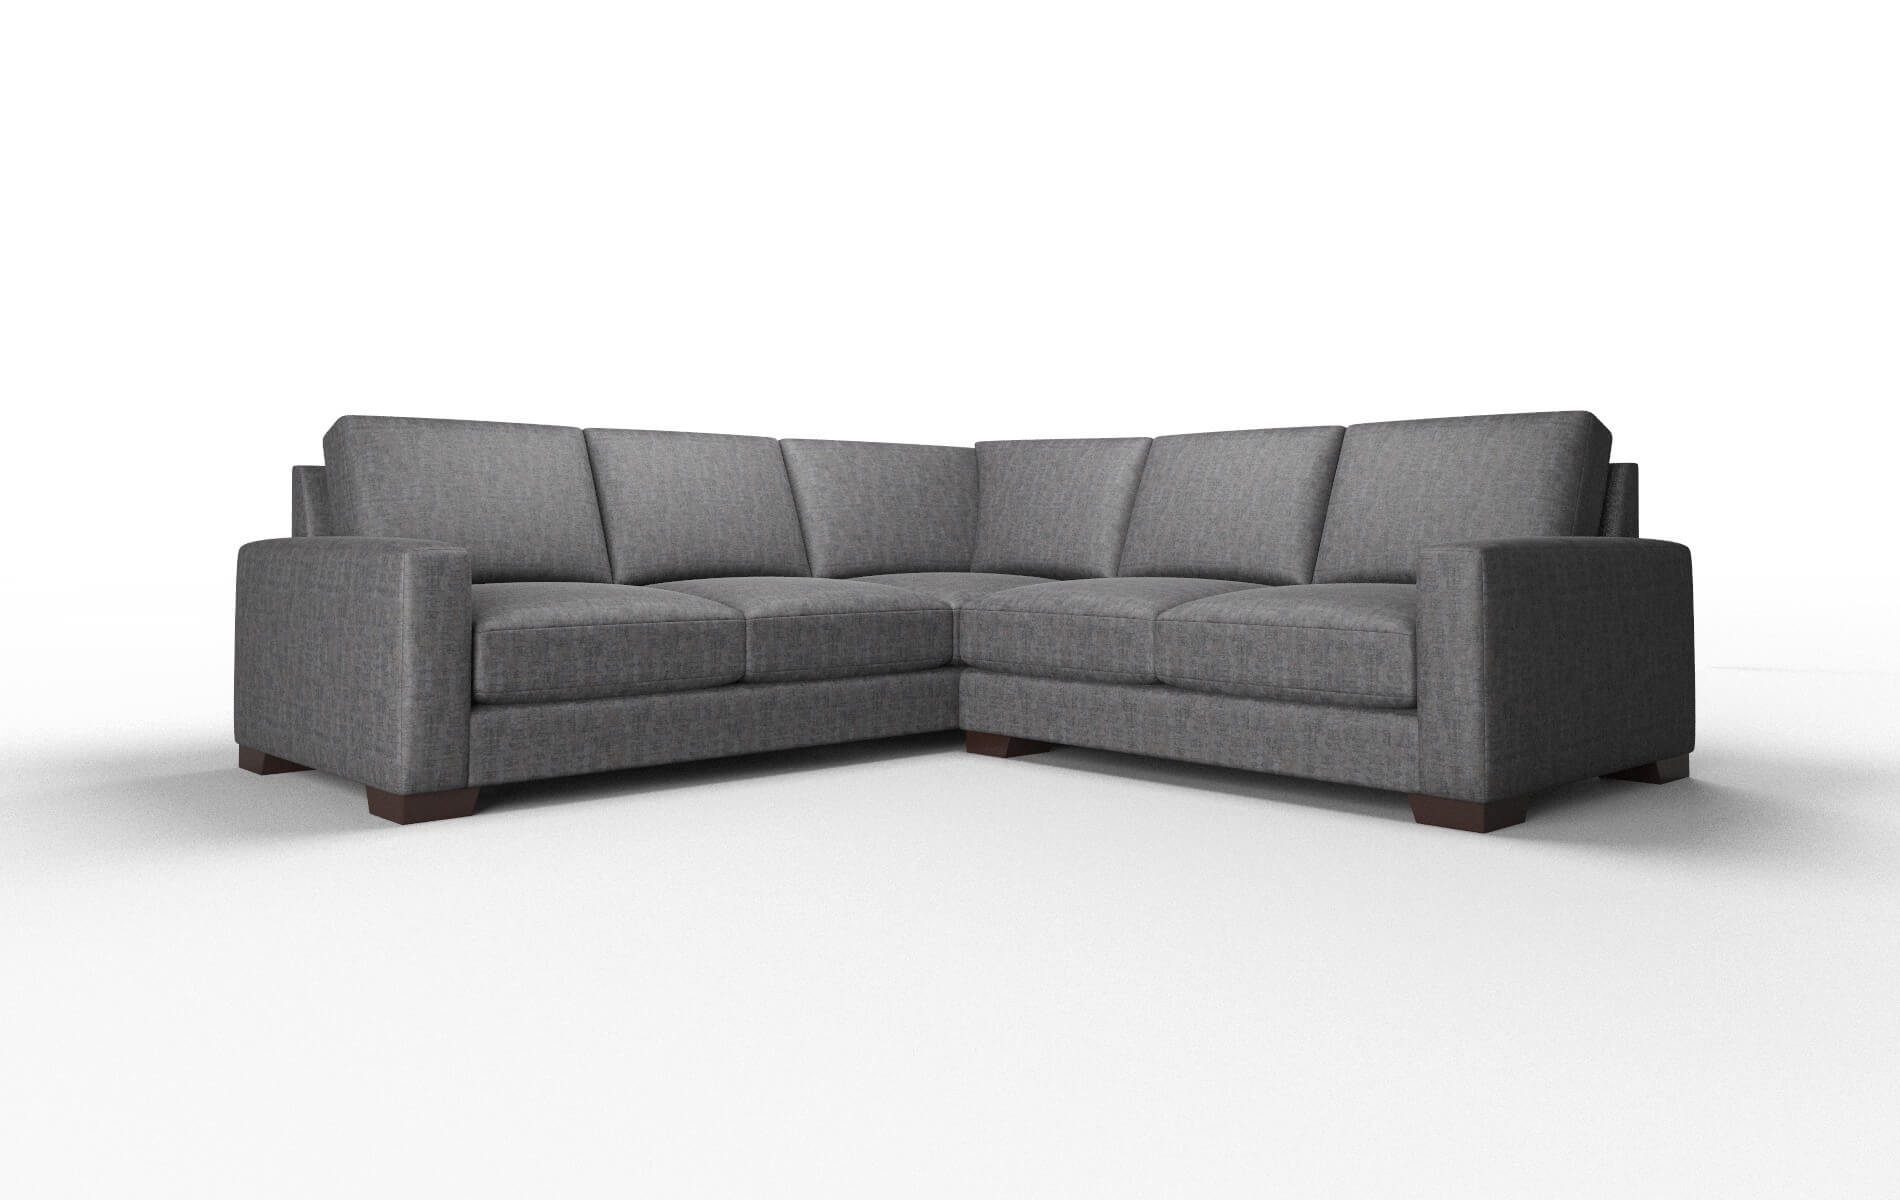 London Marcy Baltic Sectional espresso legs